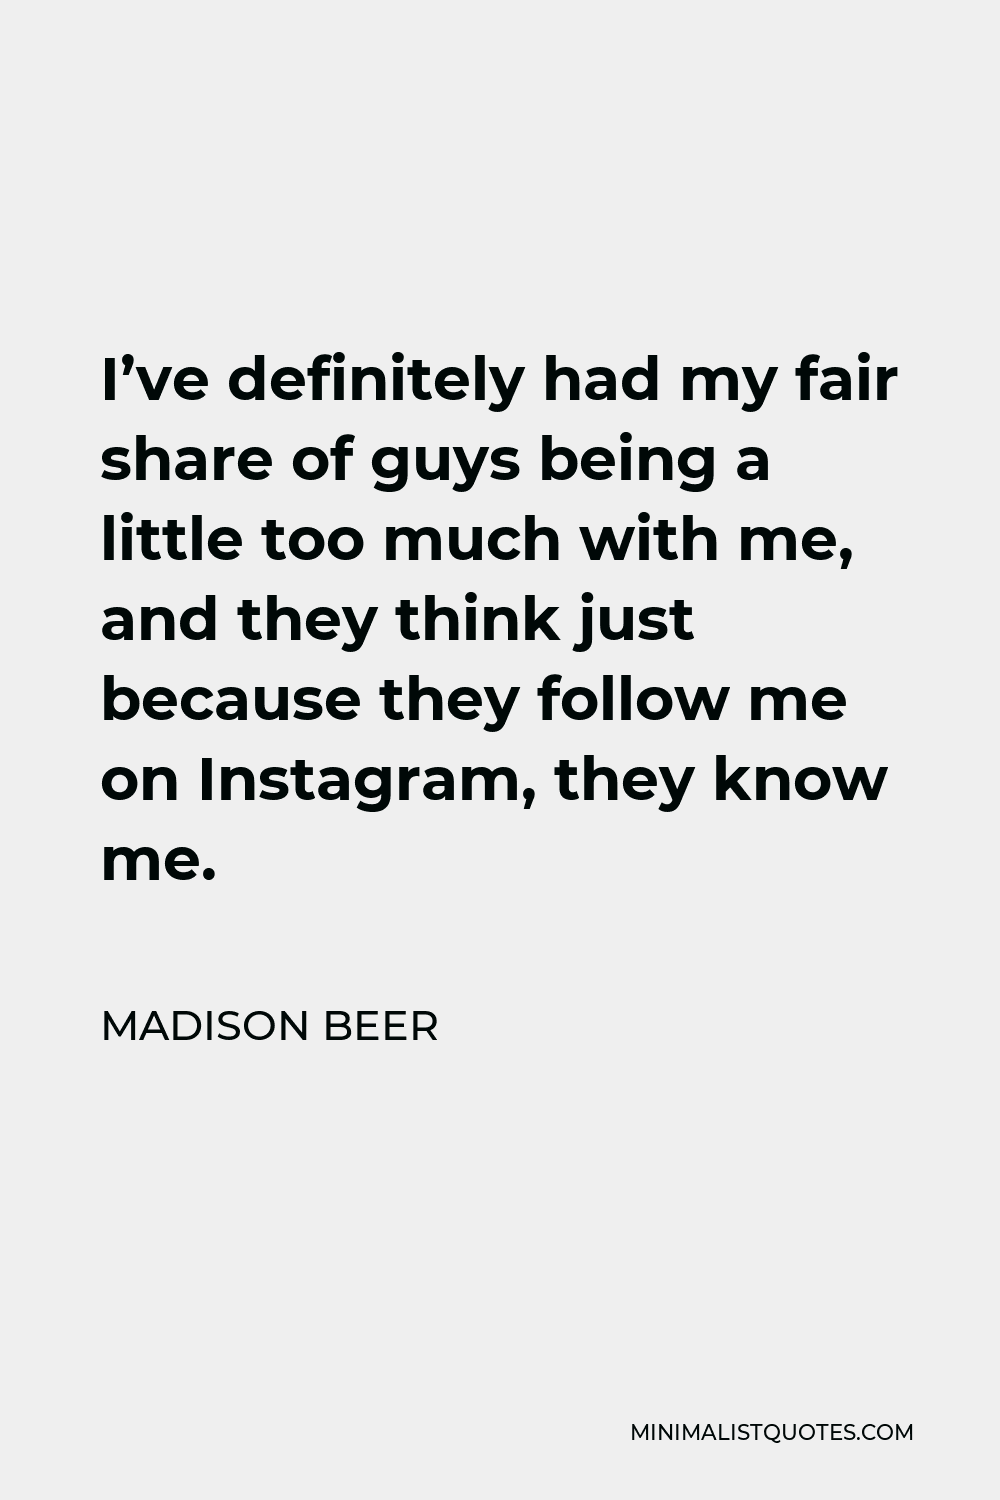 Madison Beer Quote - I’ve definitely had my fair share of guys being a little too much with me, and they think just because they follow me on Instagram, they know me.